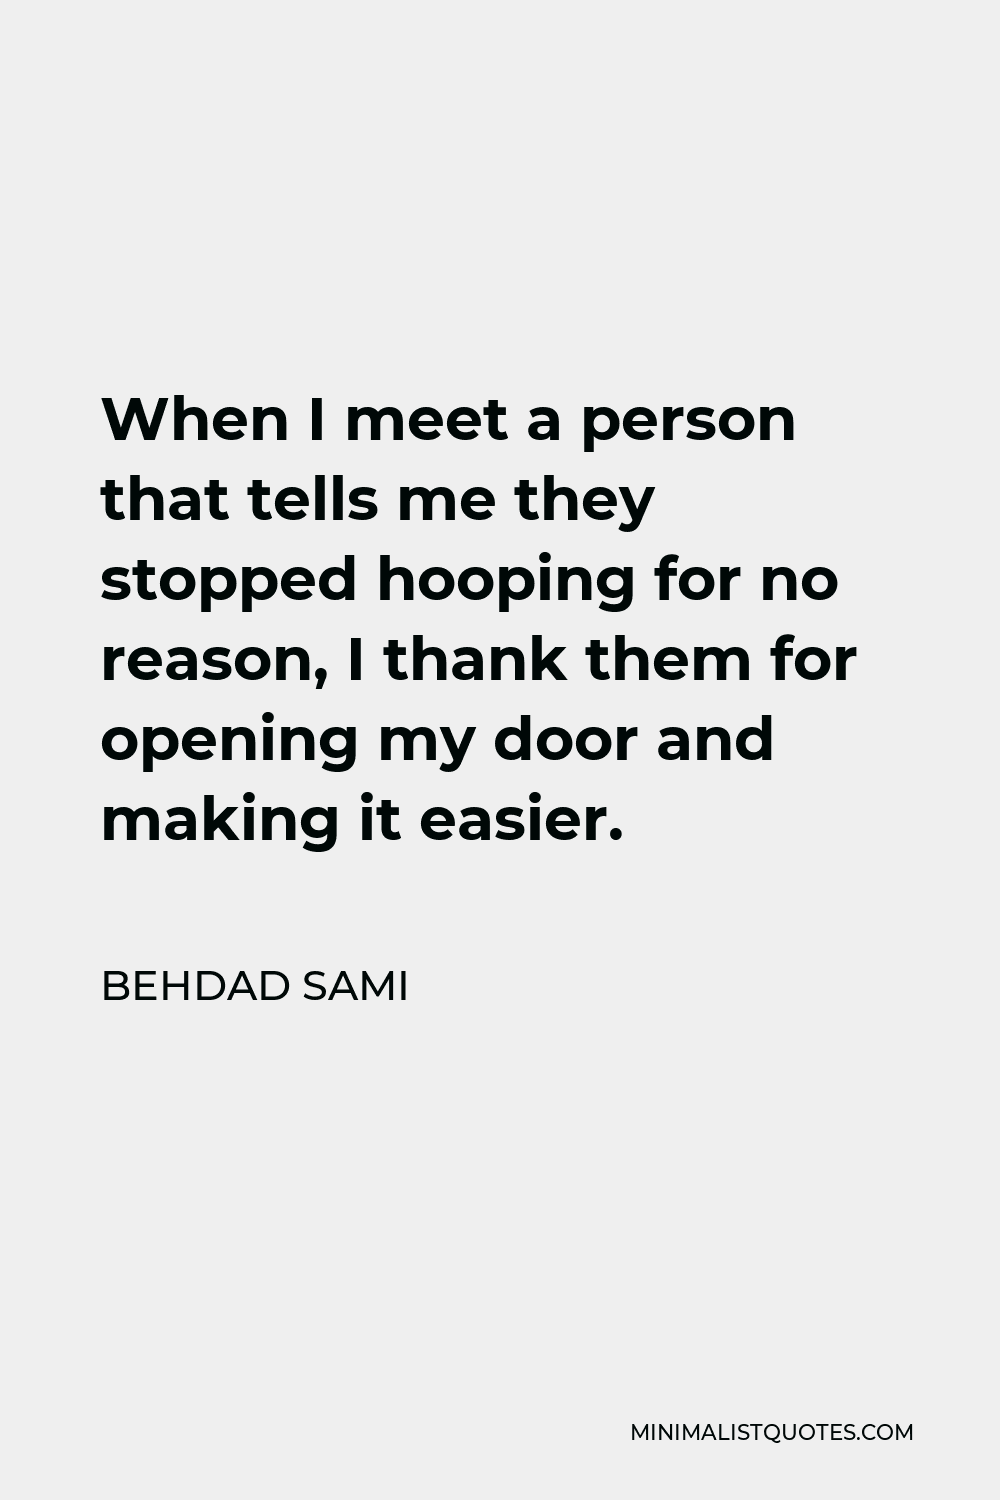 Behdad Sami Quote - When I meet a person that tells me they stopped hooping for no reason, I thank them for opening my door and making it easier.